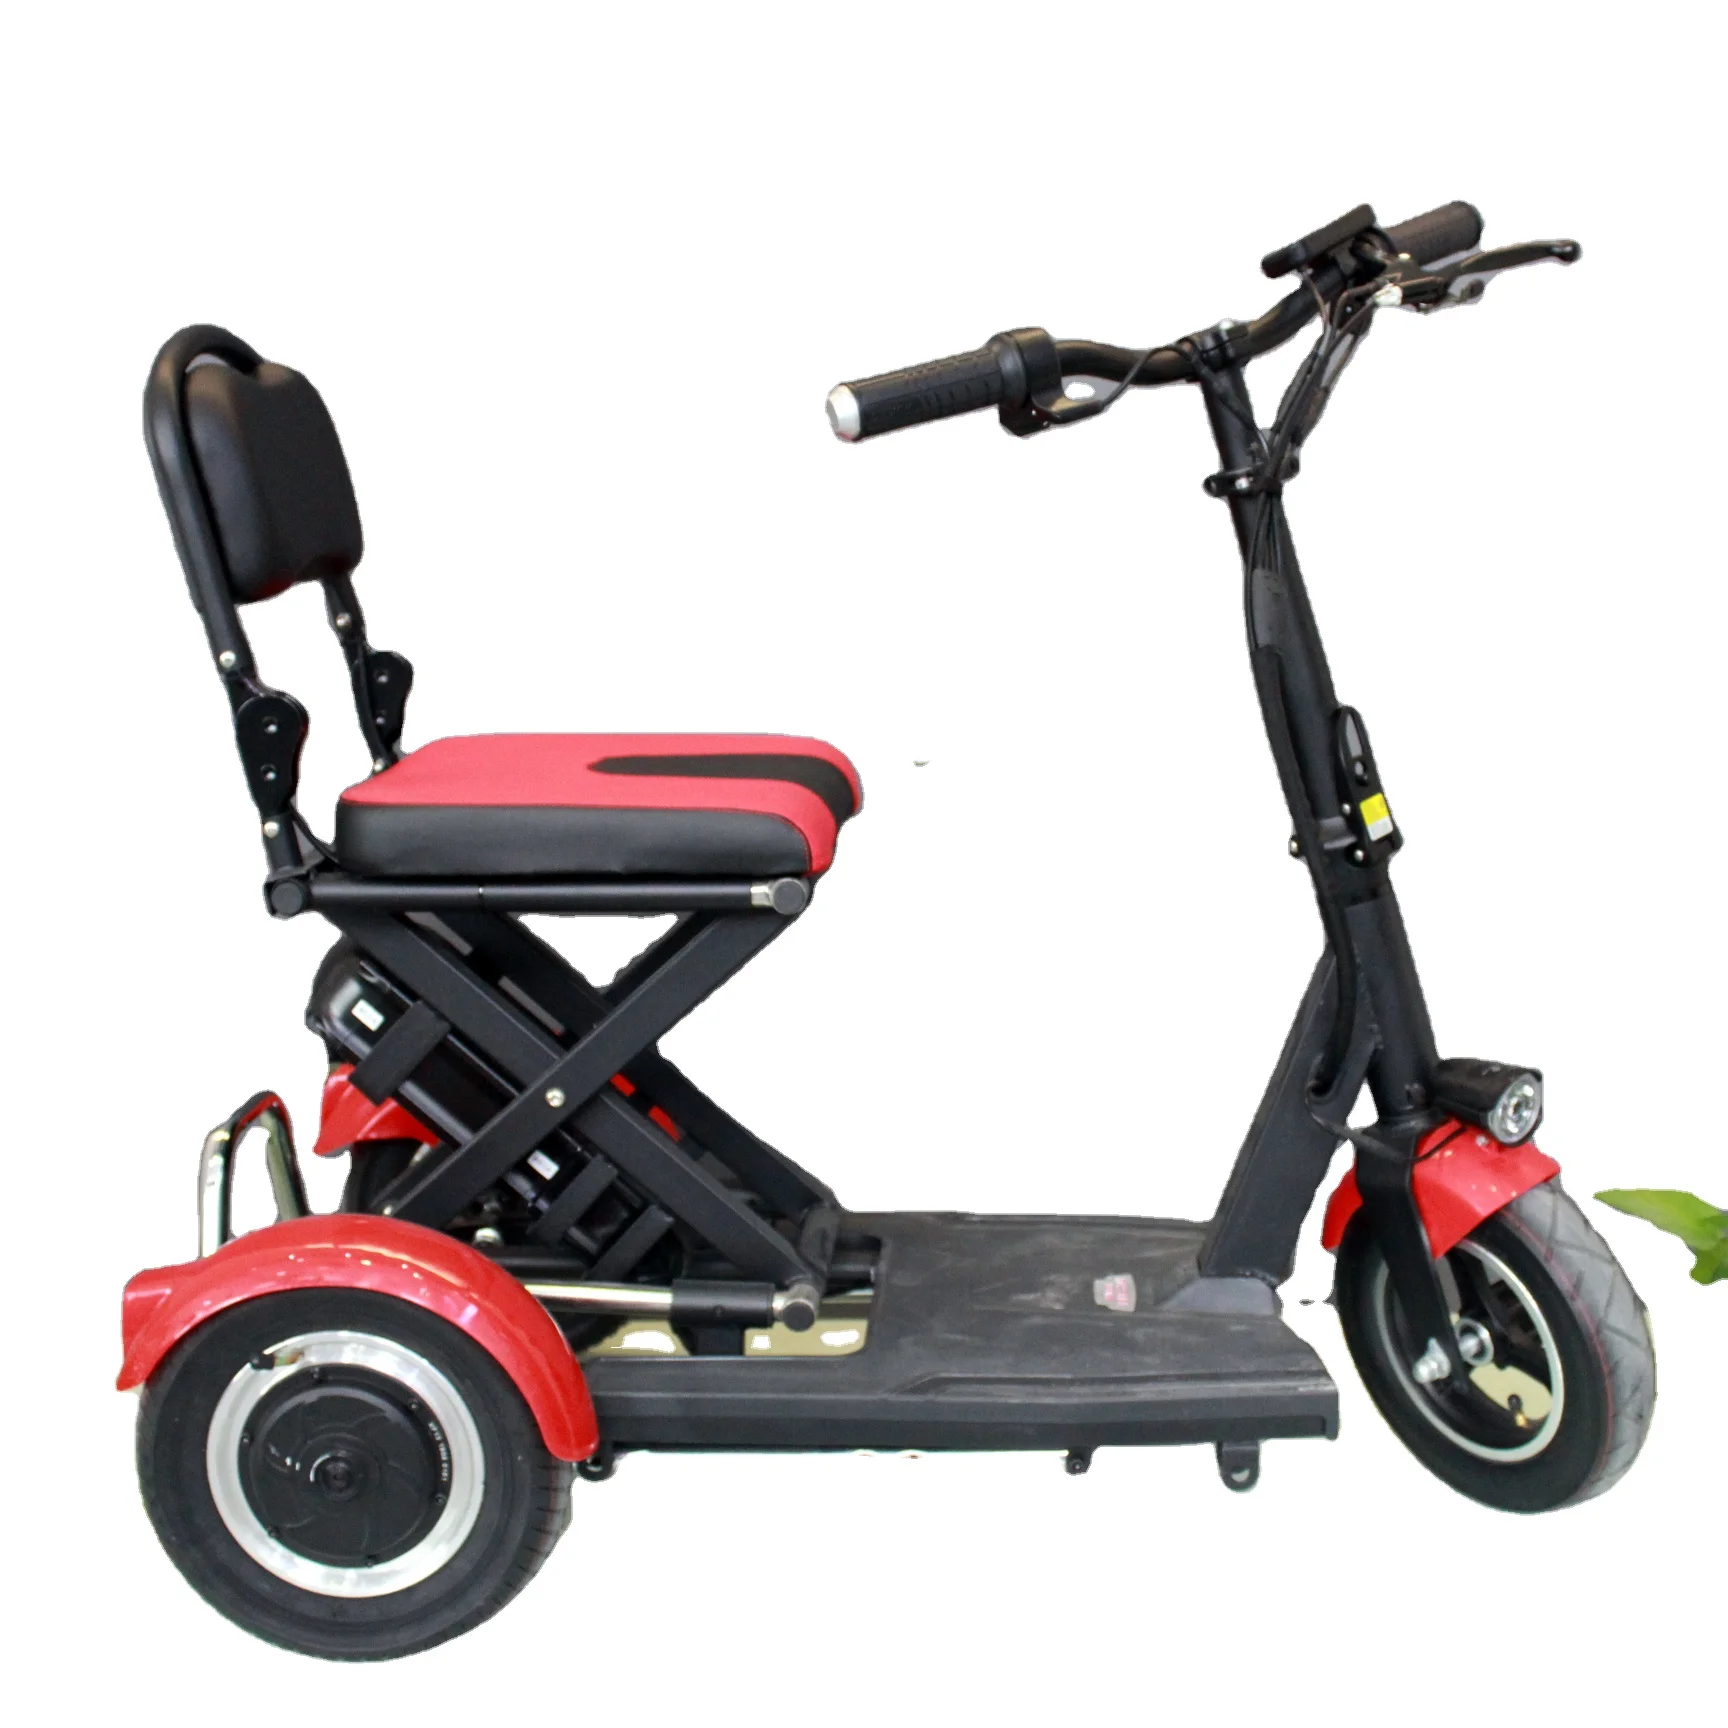 Electric Scooter Folding Type For Elderly And Disabled Handicapped Scooters 36v/48v 10Ah Lithium Battery Motor Scooter custom samebike lo26 ii foldable mountain electric bike 750w motor 48v 10ah battery 60 80 km range 35km h max speed white